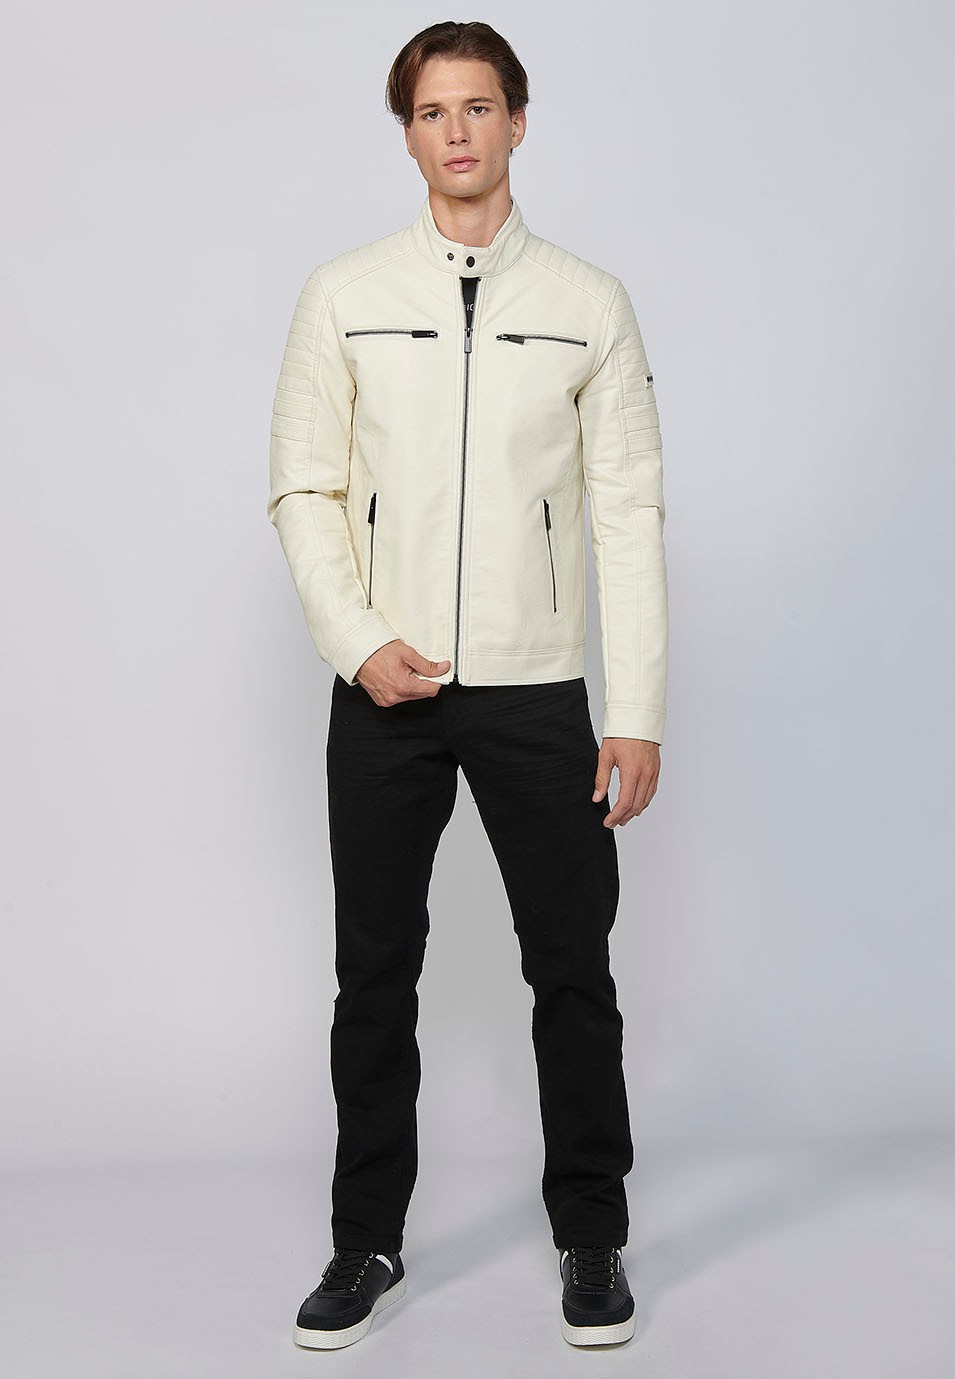 Long-sleeved Jacket with Round Neck and Details on the shoulders and arms in Ecru for Men